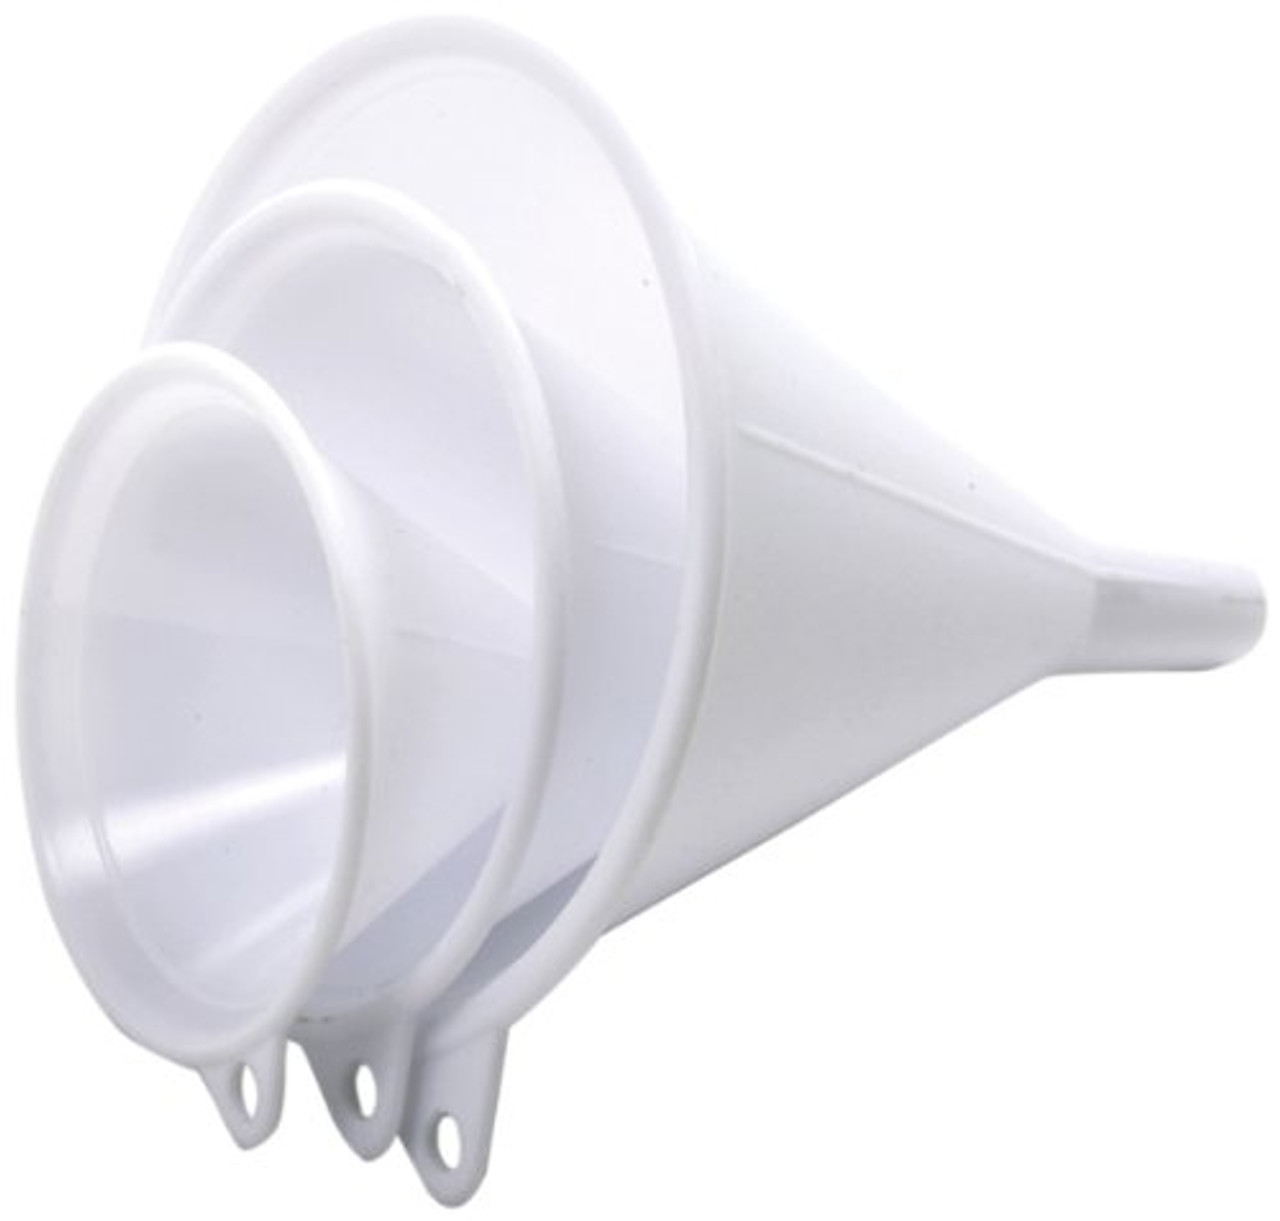 Kitchen Funnel Set Nested Funnels With Handle 4 Pack Plastic